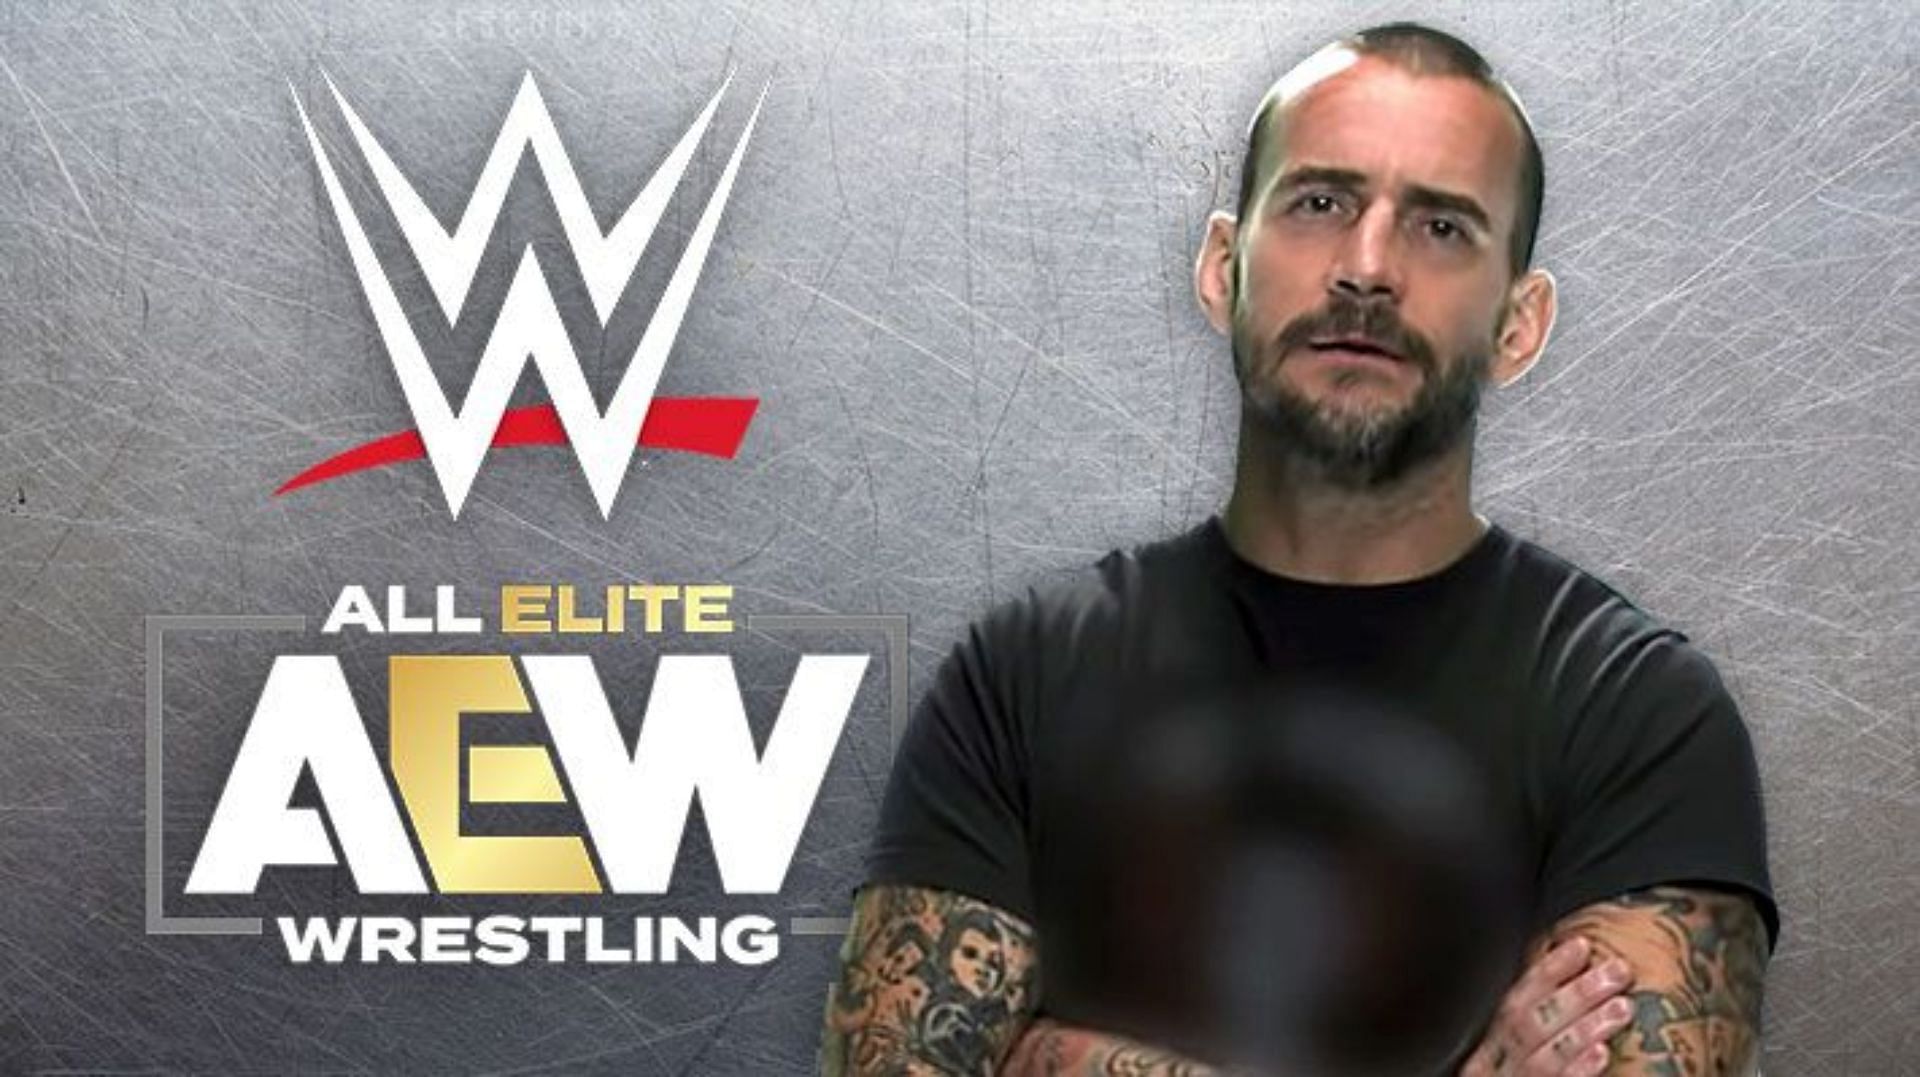 CM Punk made his return to pro wrestling last year.